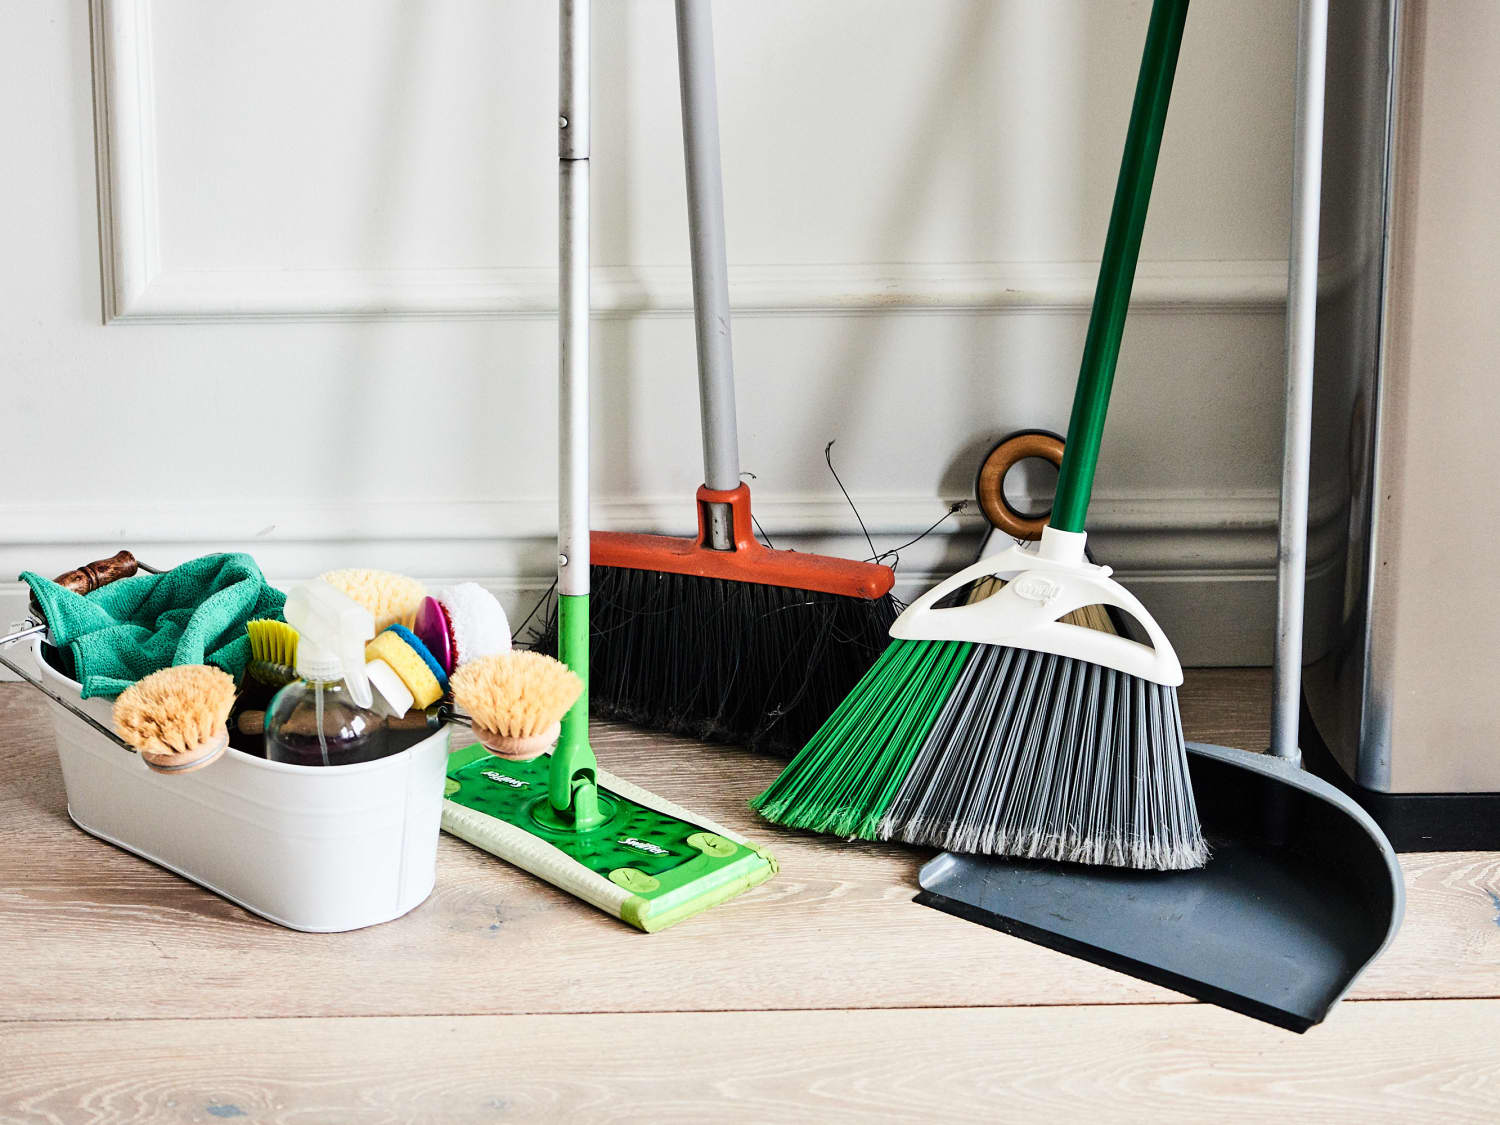 Broombi Broom Review: This Broom Cleans Your Floor Like a Squeegee